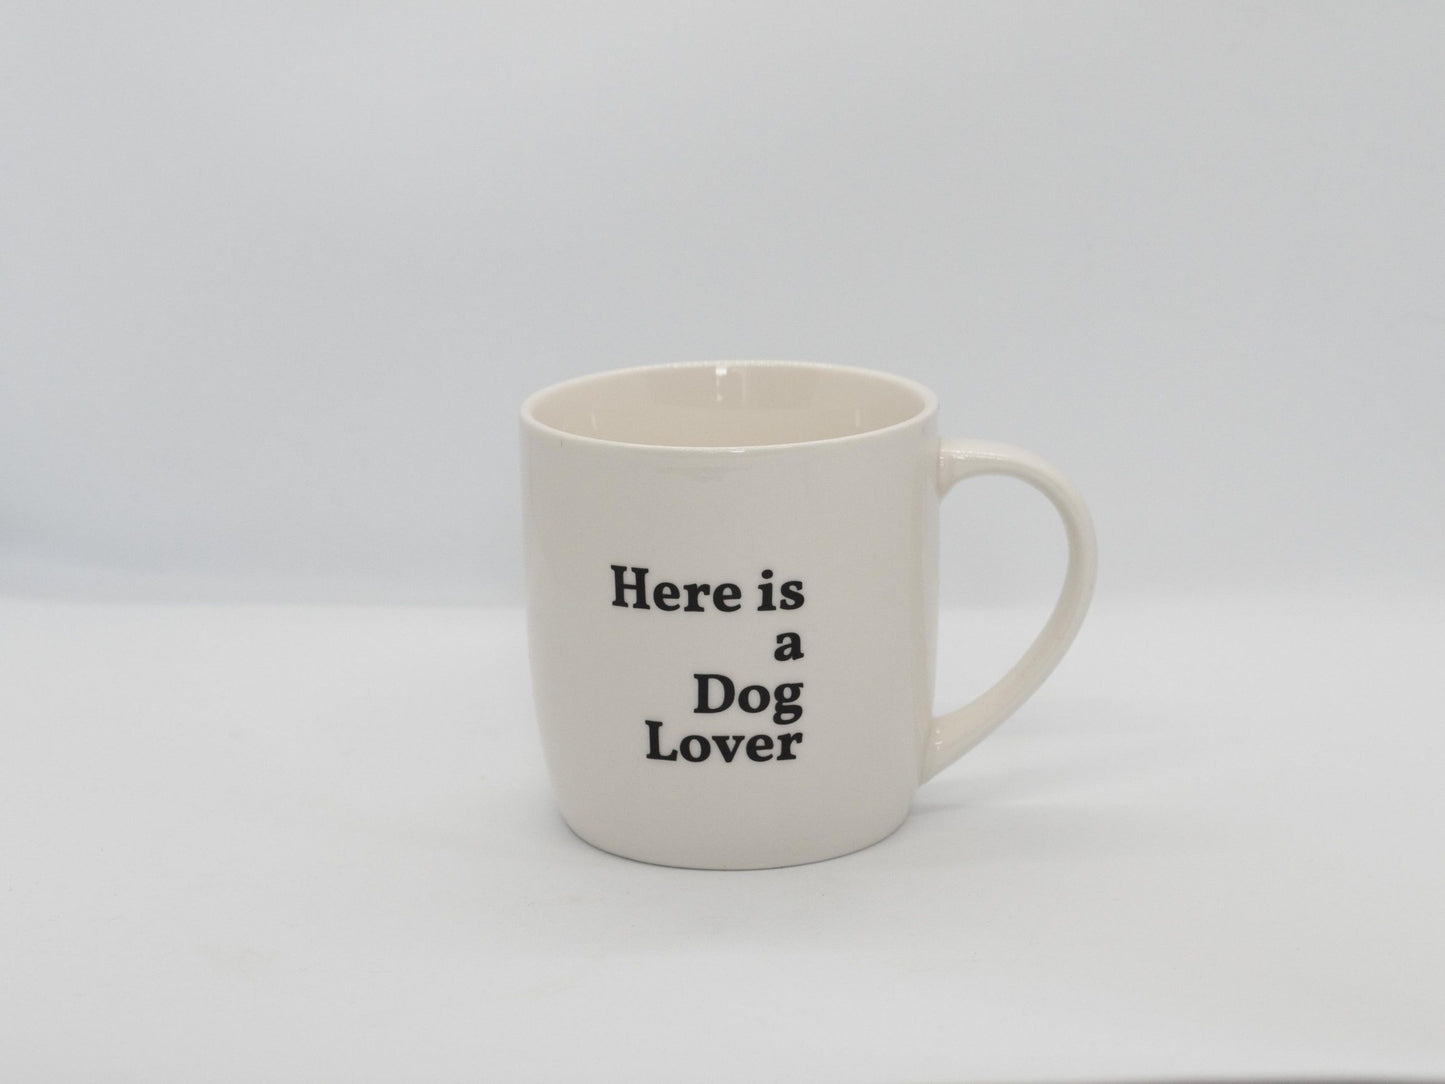 Tas/mok met quote 'here is a dog lover'